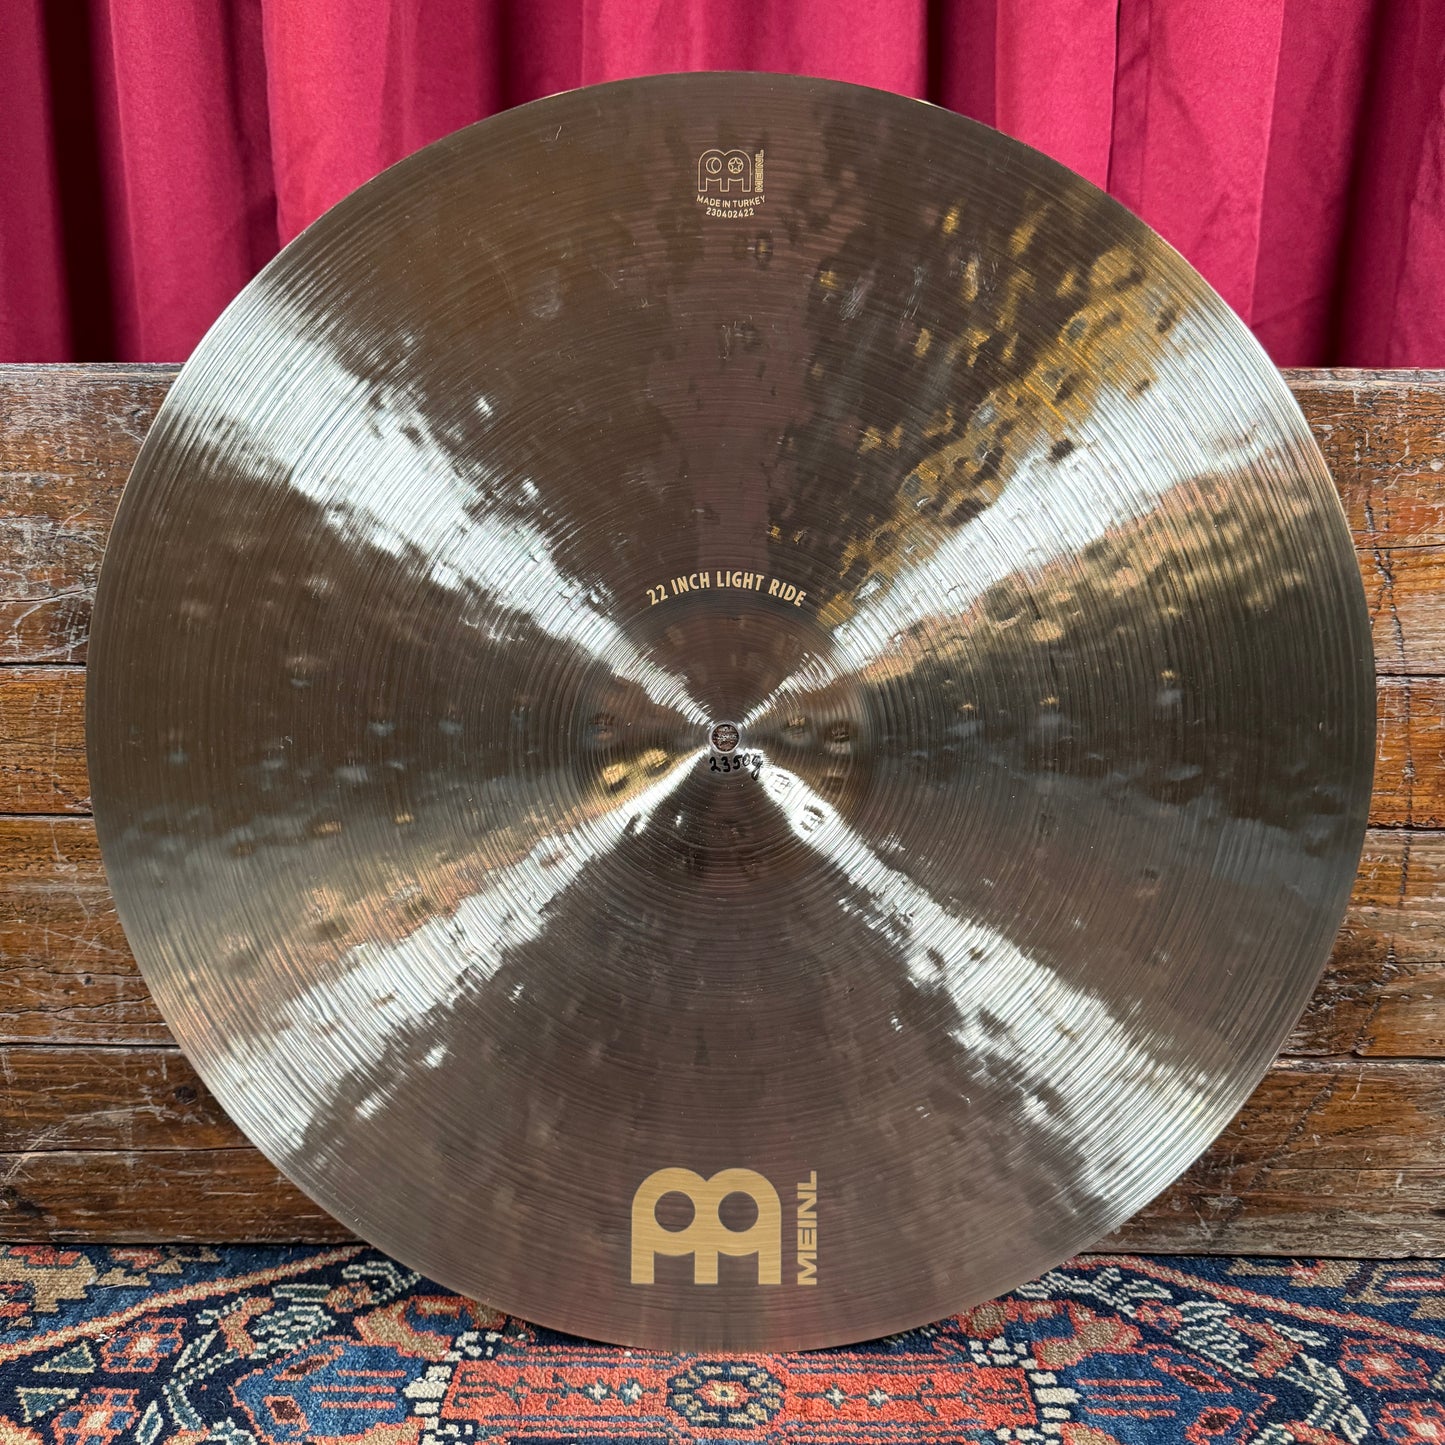 22" Meinl Byzance Foundry Reserve Light Ride Cymbal 2350g *Video Demo*